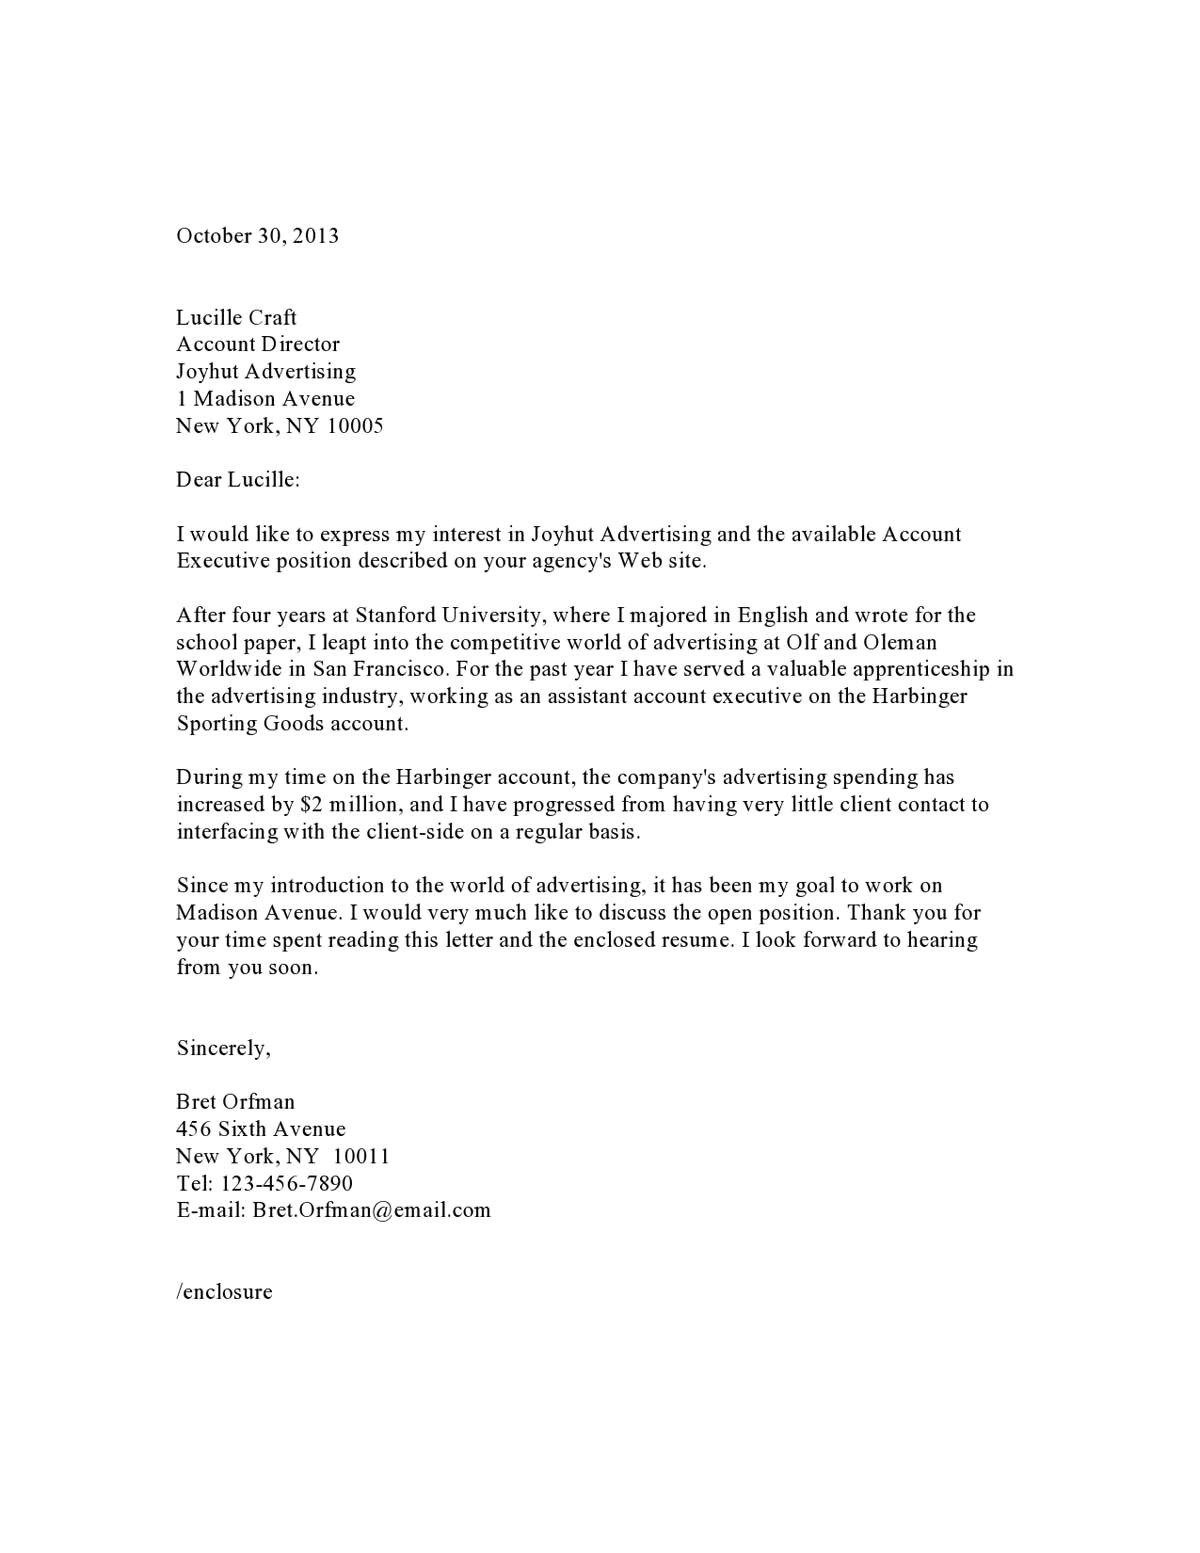 Cover Letter Templats Cover Letter Samples Download Free Cover Letter Templates